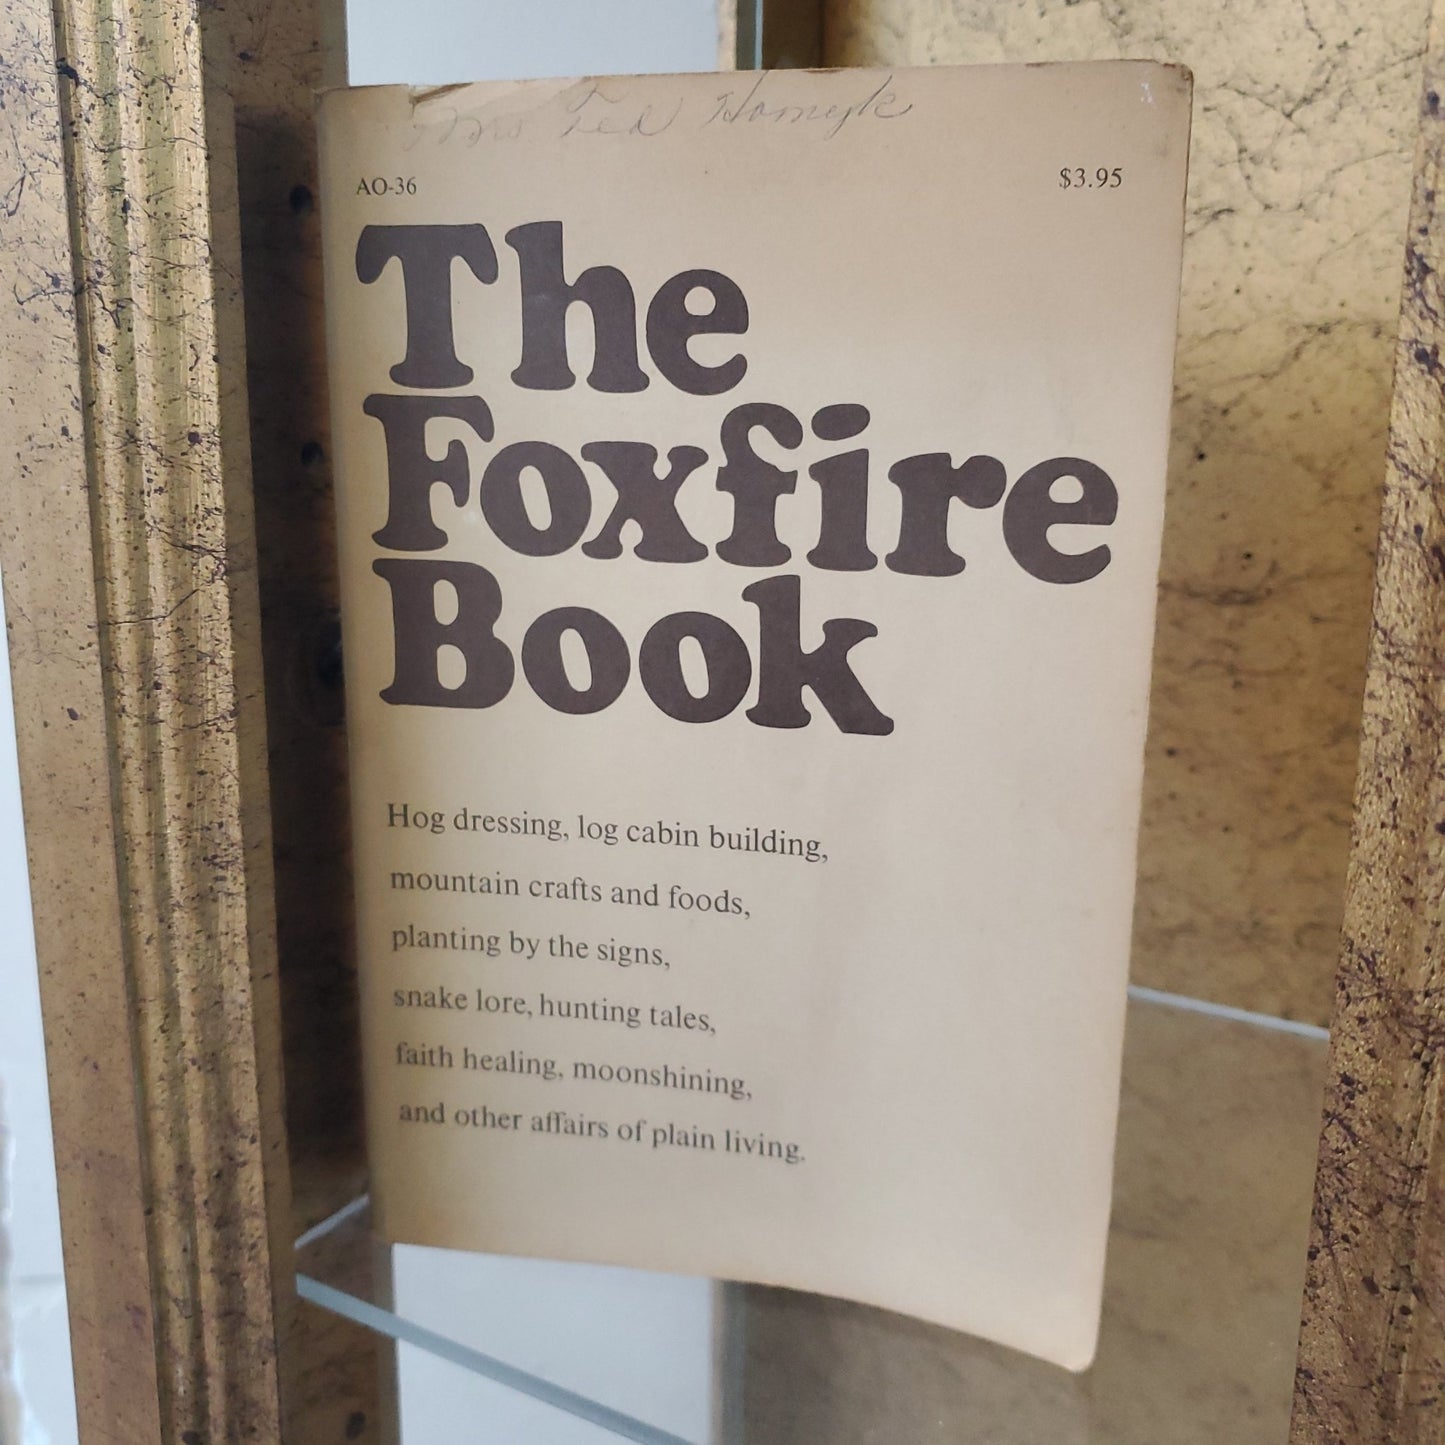 The Foxfire Book - [ash-ling] Booksellers